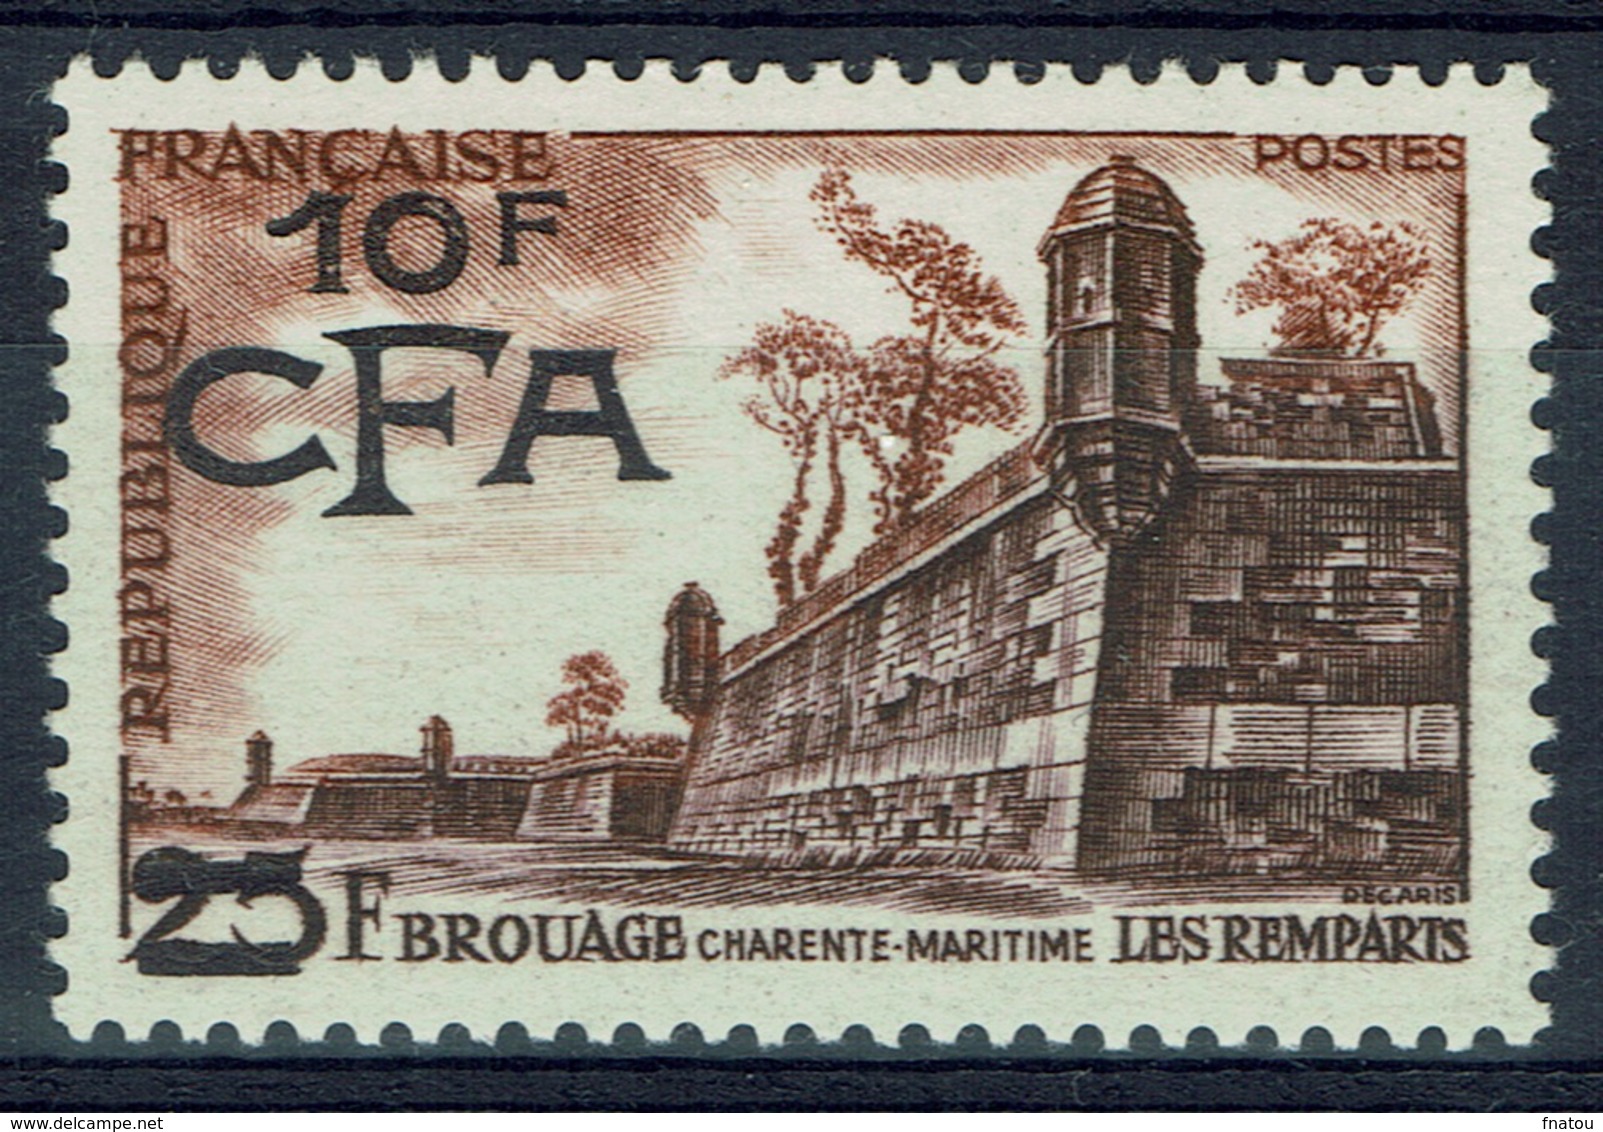 Réunion Island, "Brouage", French Stamp Overprint, 1955, MNH VF - Unused Stamps